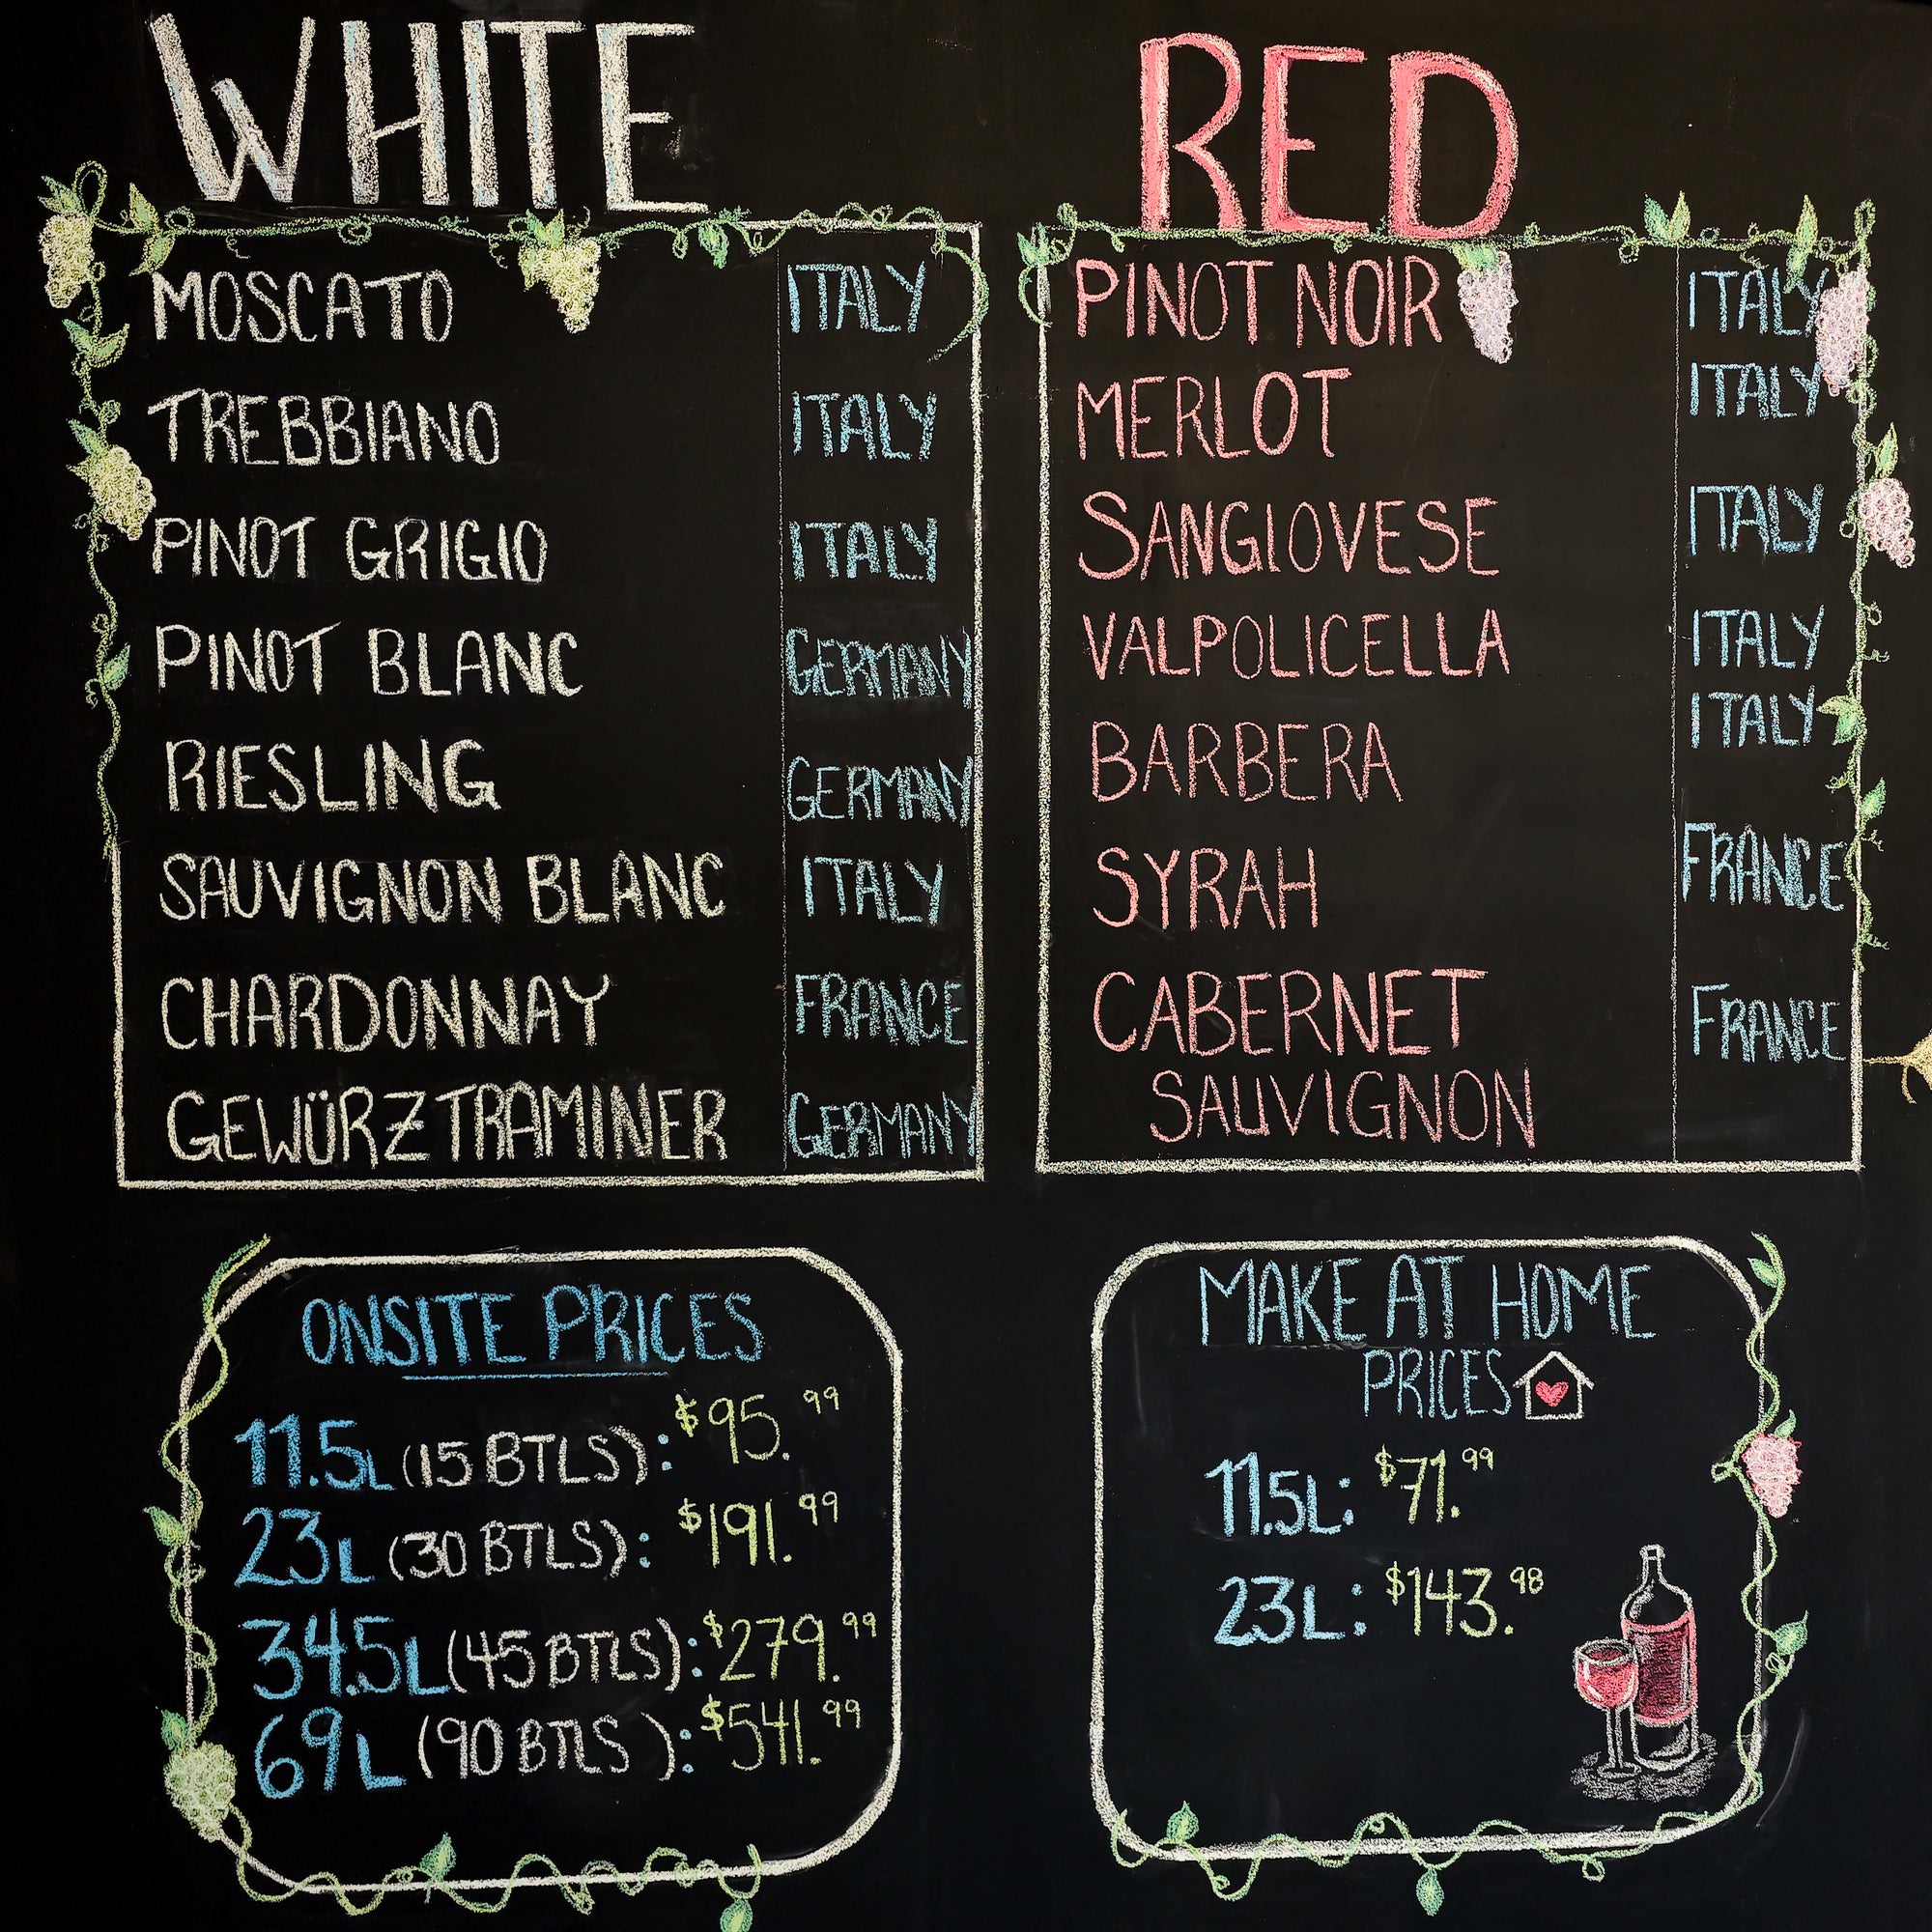 Our 2022-23 Wine Pricelist (this is the chalkboard in our store)